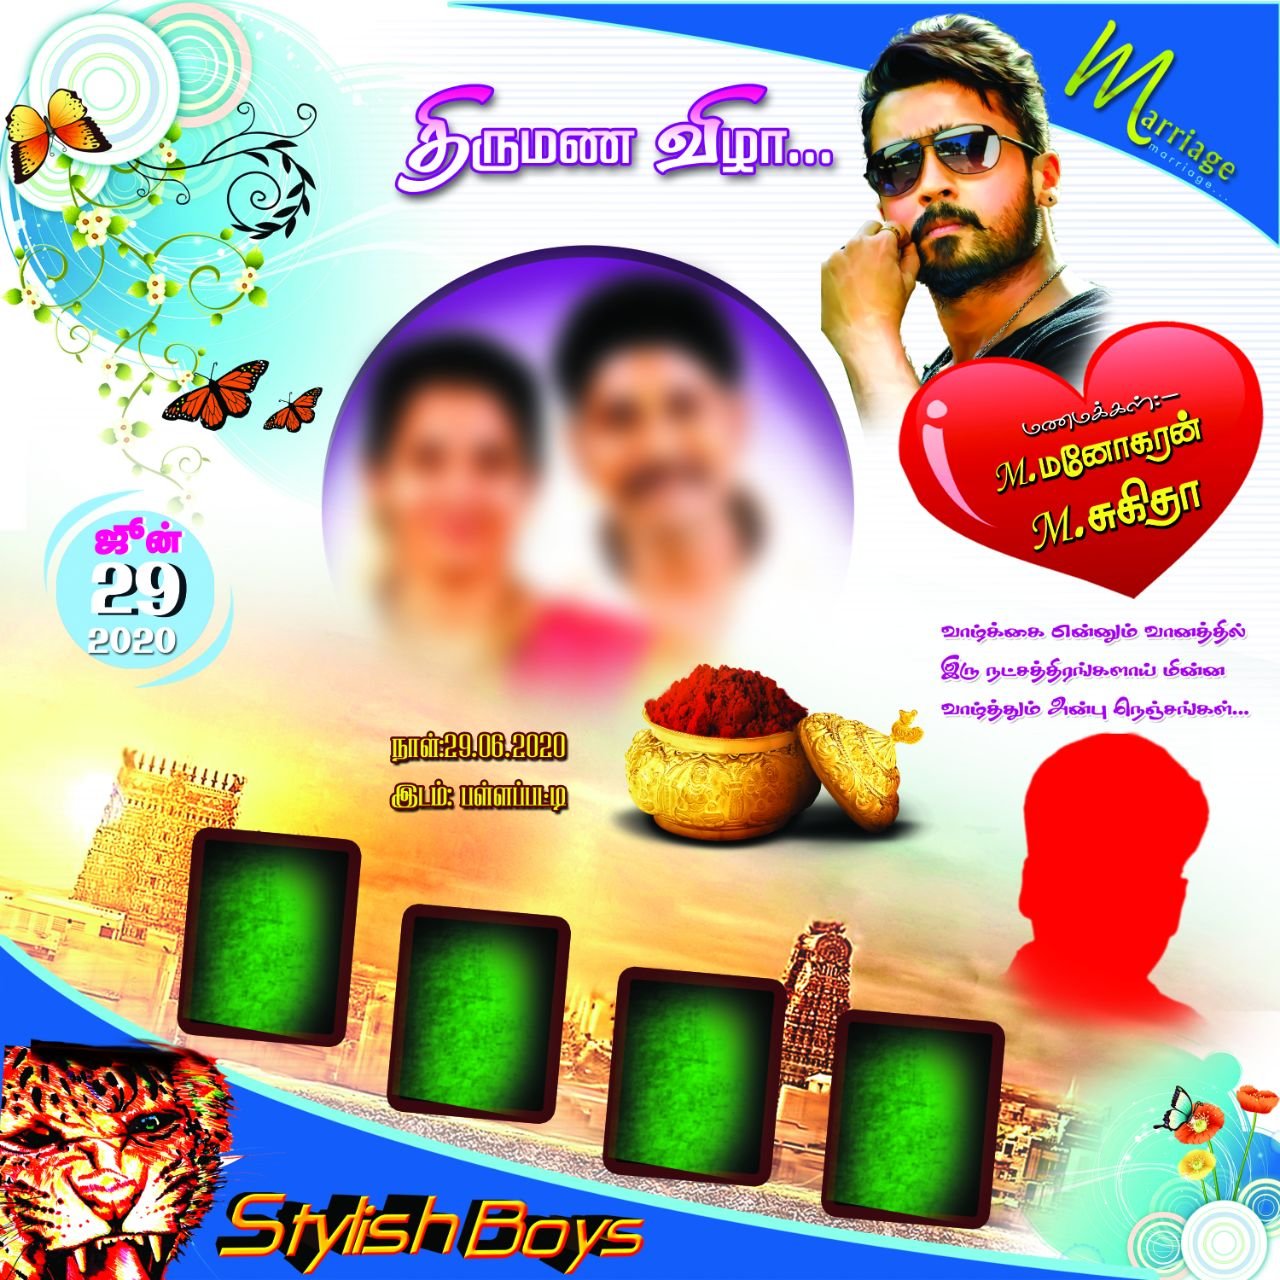 Wedding Editing Birthday Flex Banner Background Design Tamil You Can Customize Your Banner Further By Finding Your Brand Colors In The Editor And Using Them In Any Of Your Designs Flex printing,wedding banners, birthday banners, political banners, occasional banners, farewell banners,multicolour designing & printing. all images